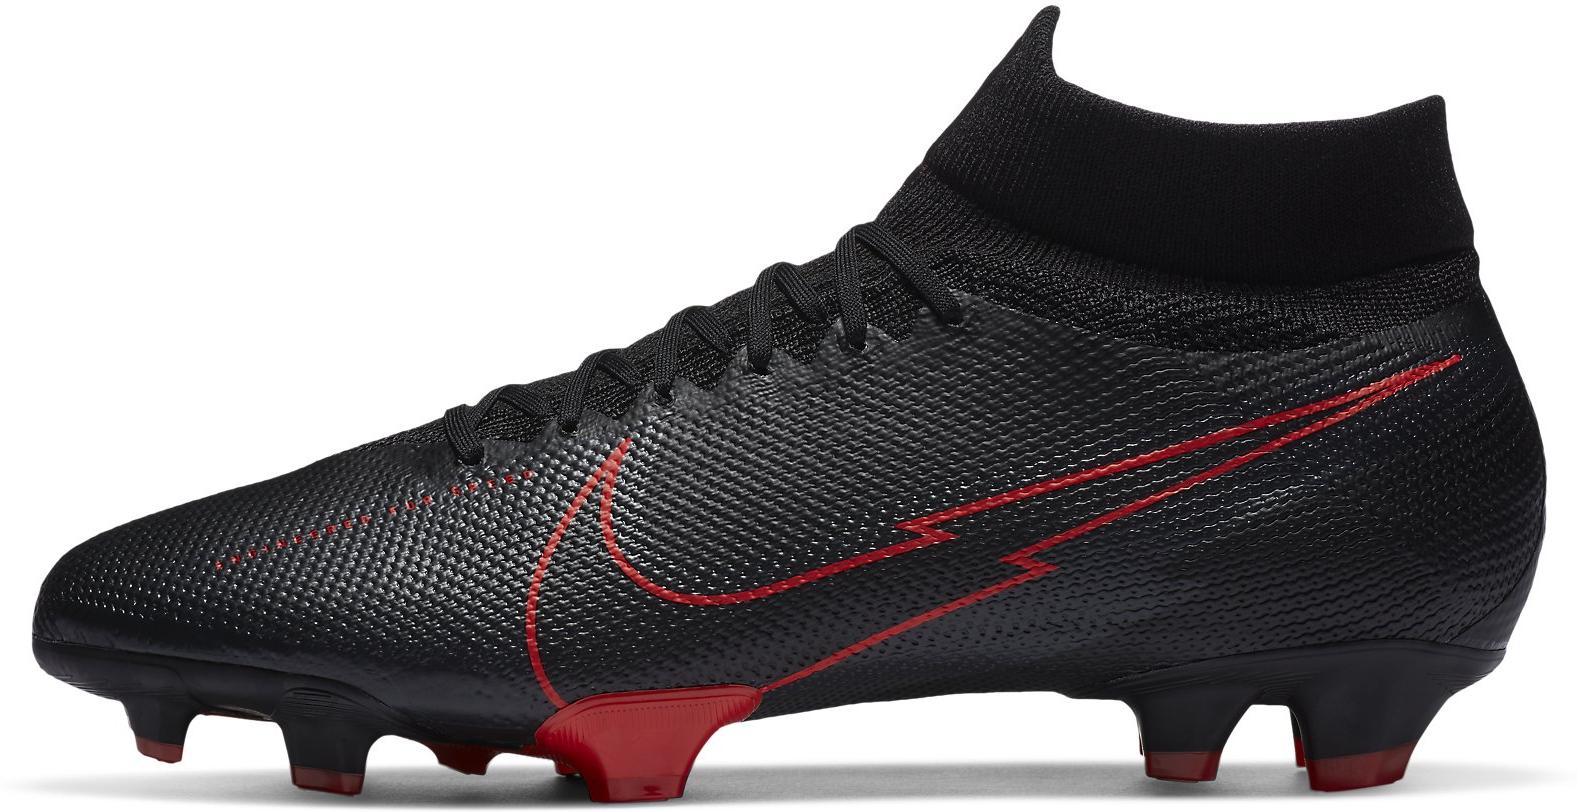 mercurial superfly 7 pro fg red